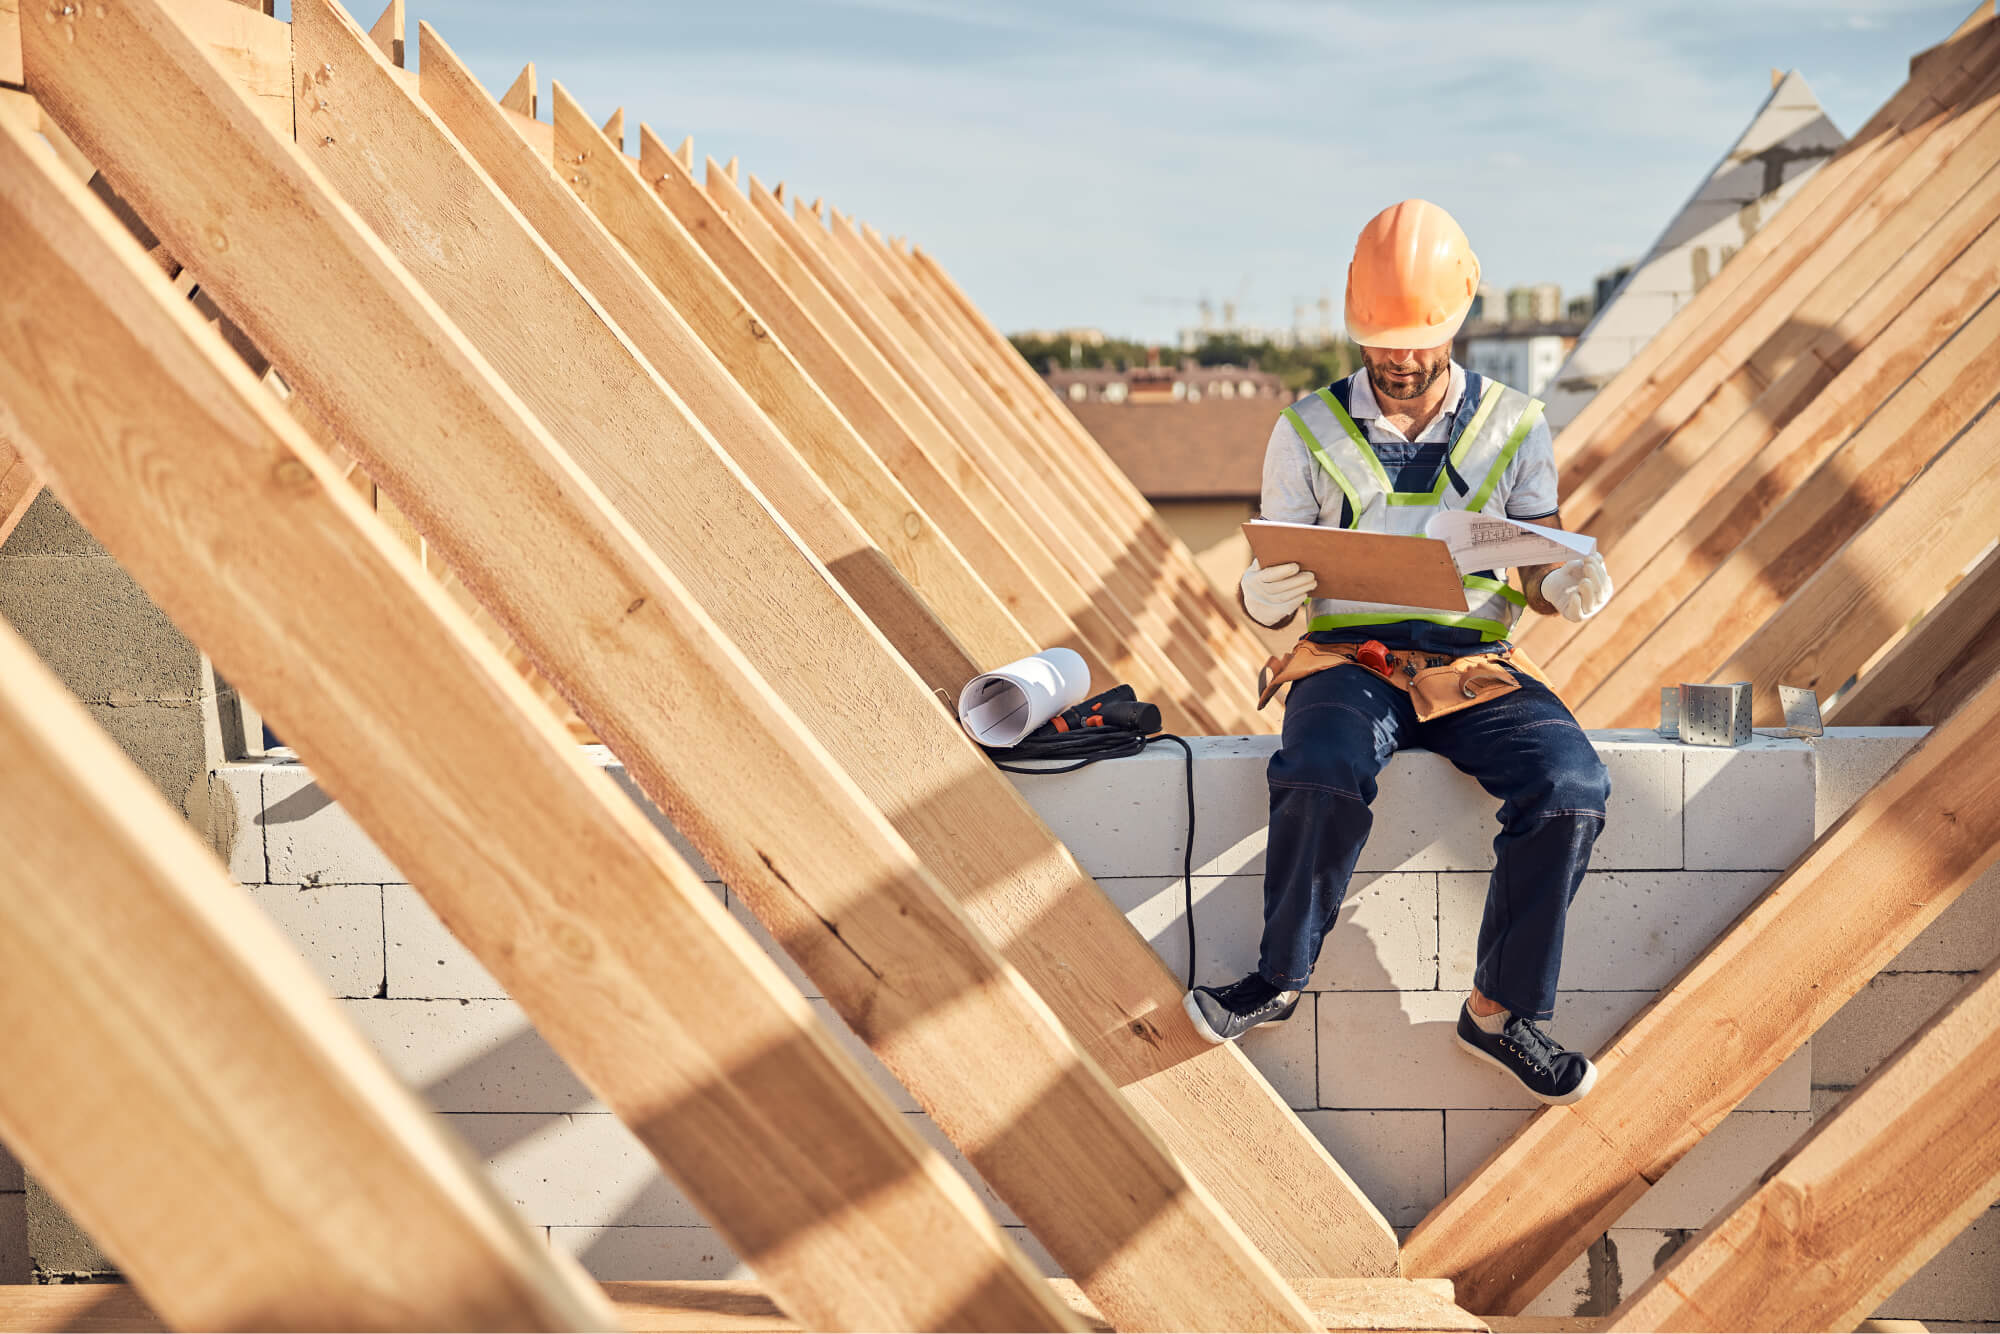 How To Run And Grow A Roofing Business?